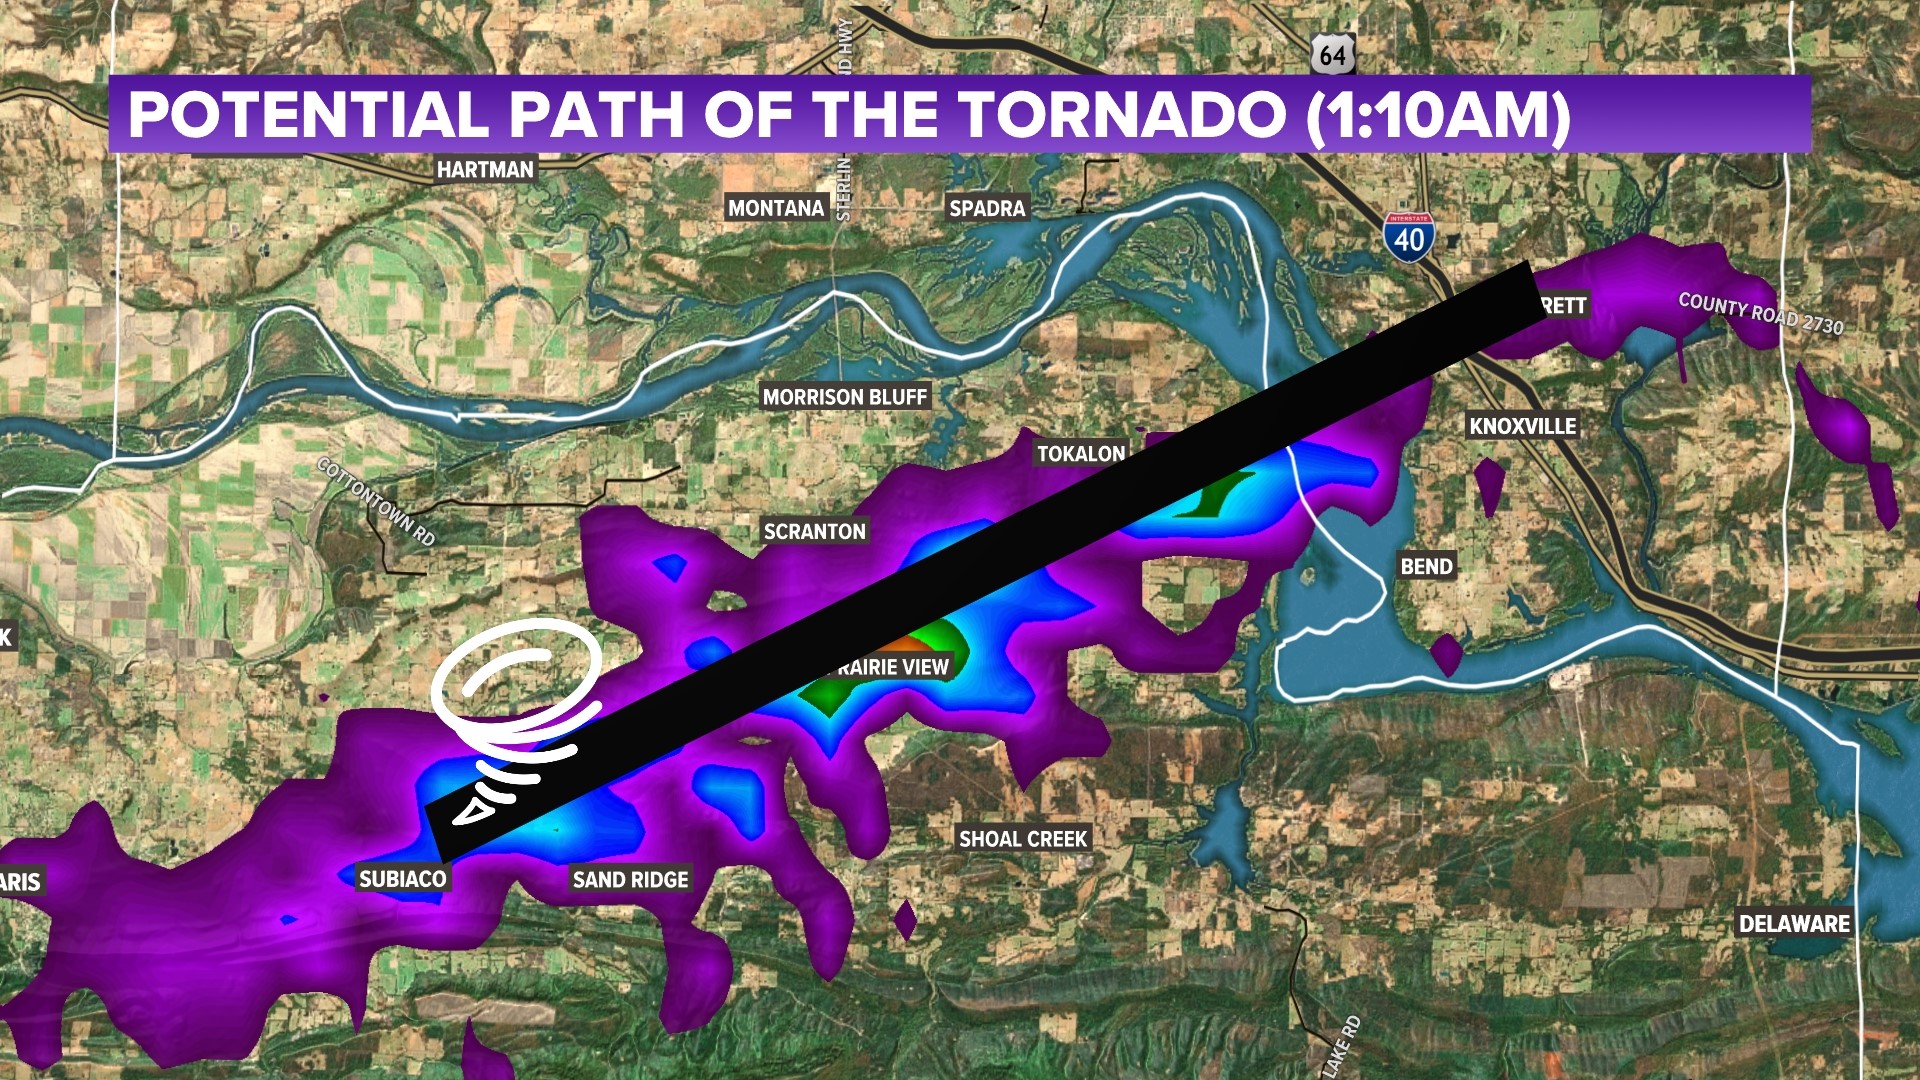 A tornado with a debris ball almost a half-mile wide touched down east of Subiaco and passed by Scranton, Lamar, and Knoxville at around 1:10-1:20 a.m. Sunday.